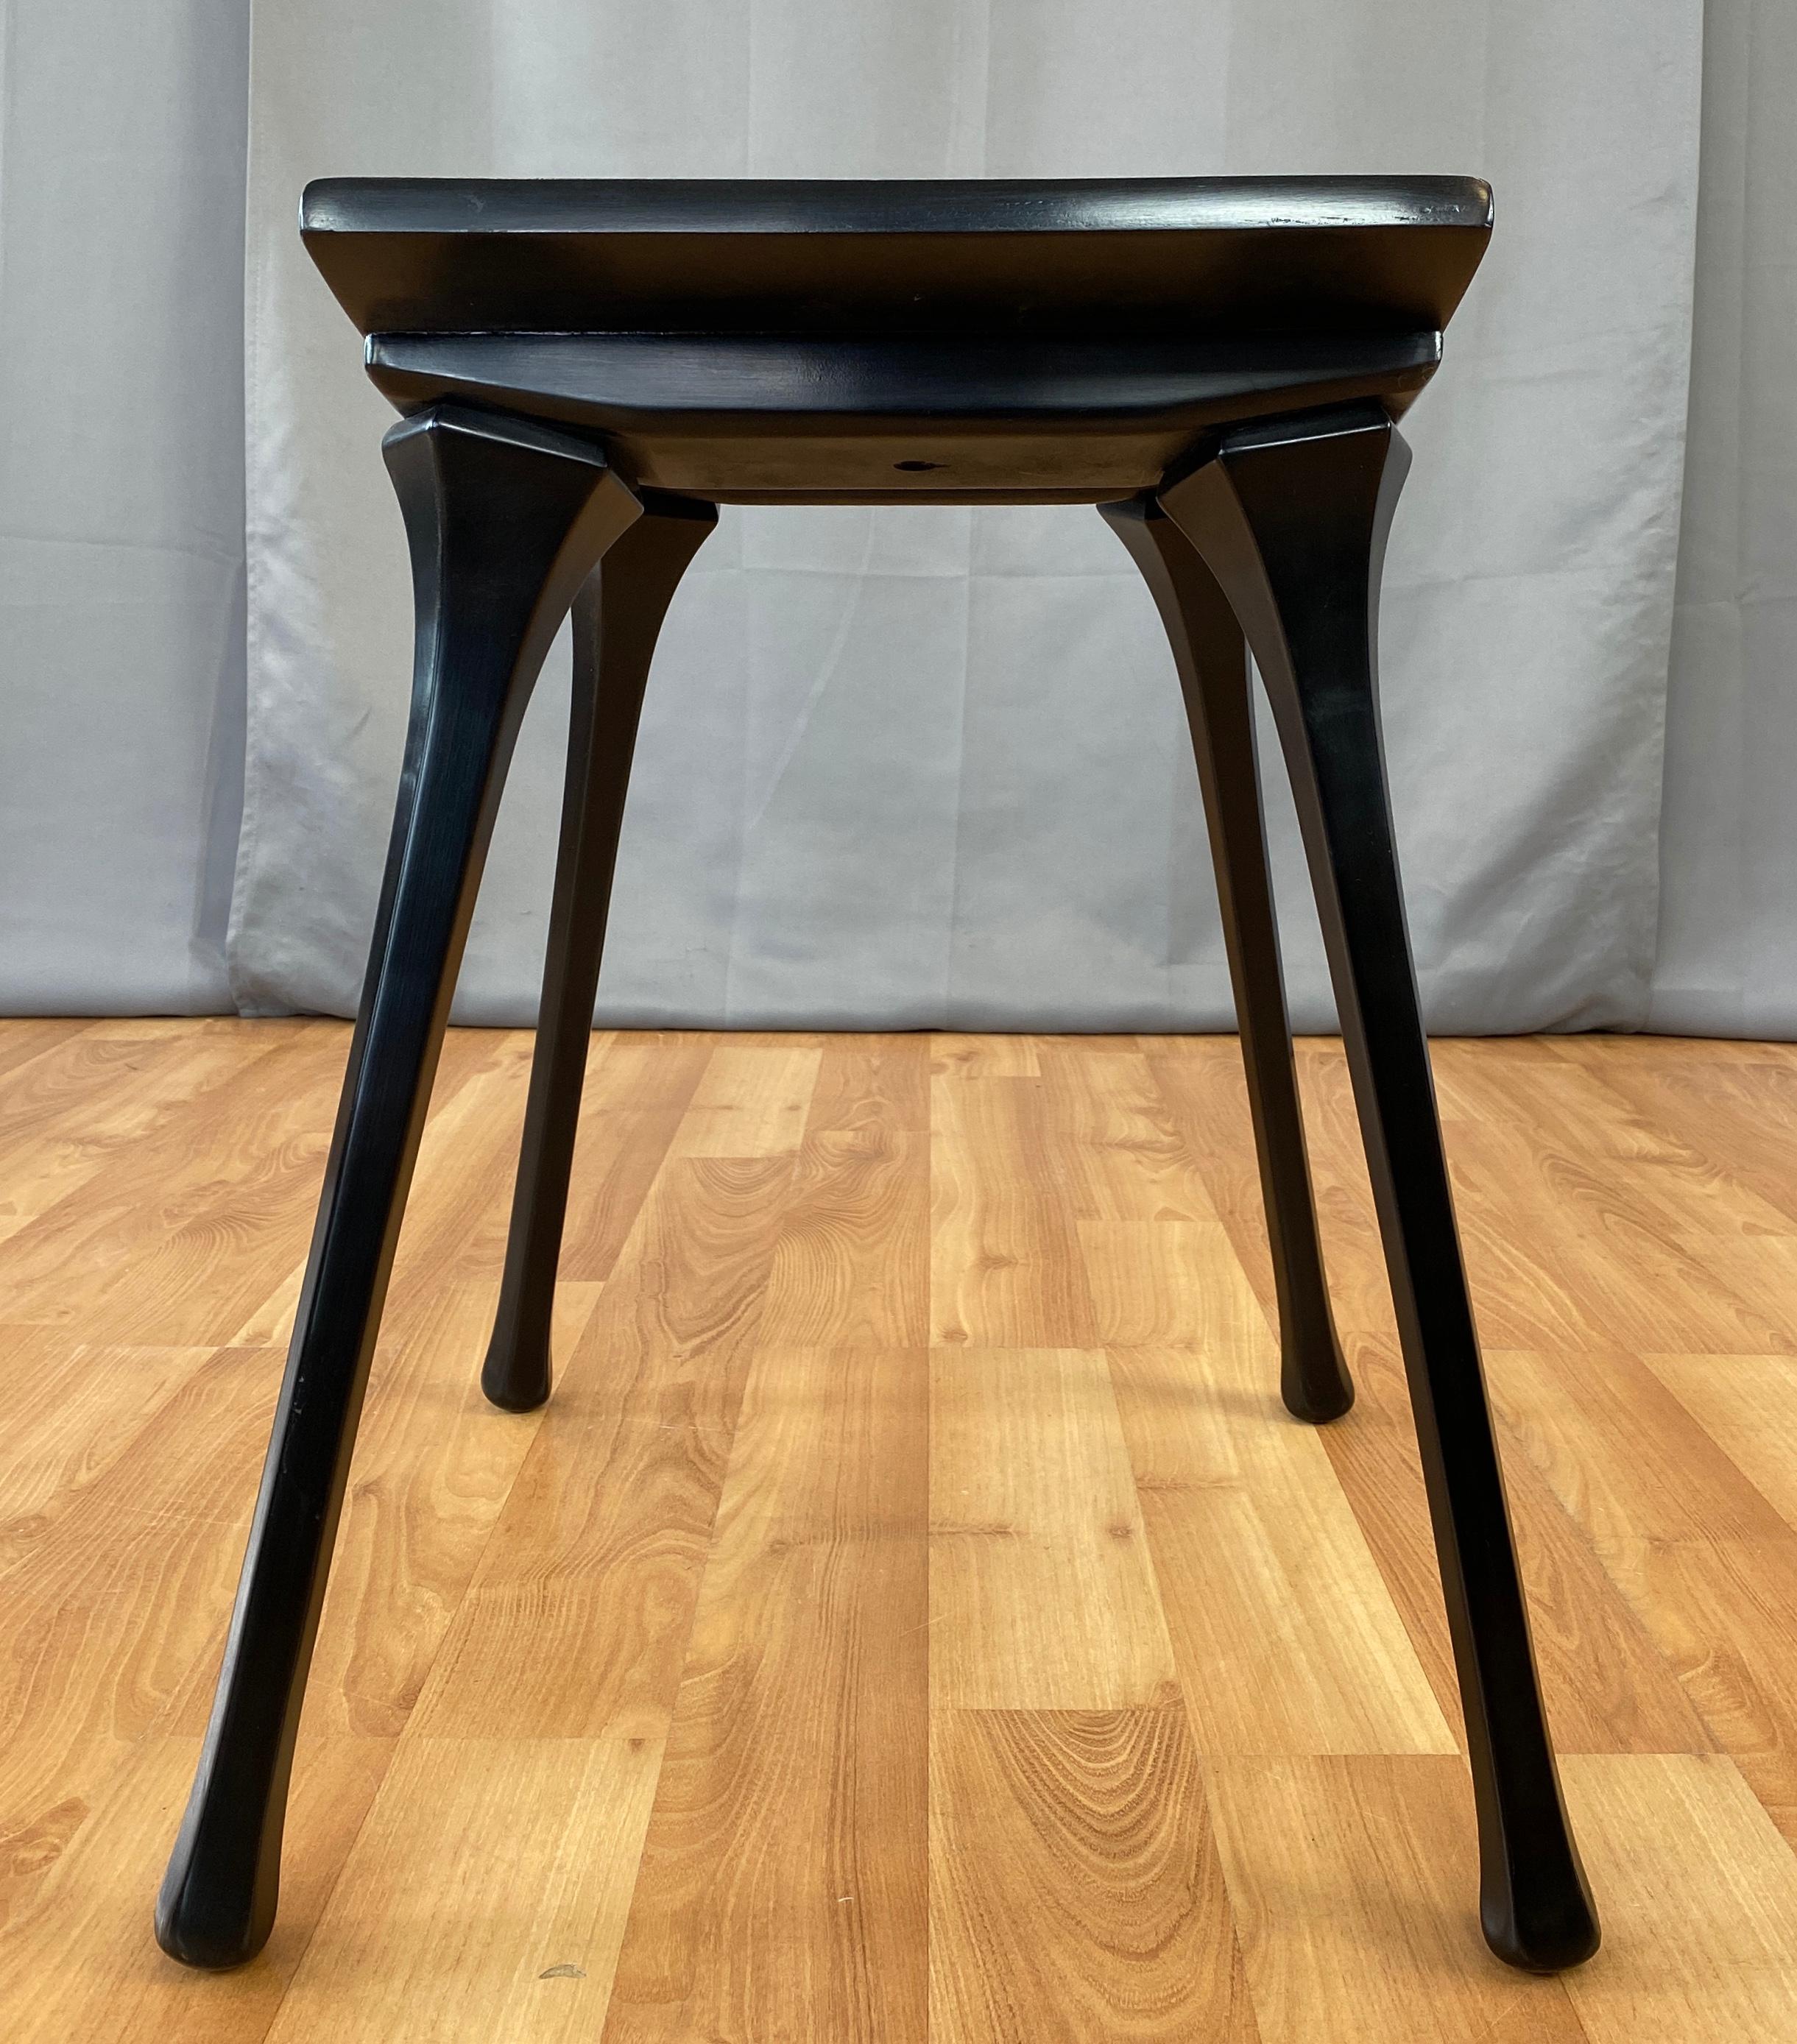 Old School Glam Black Wooden Stool circa 1940s/50s In Good Condition For Sale In San Francisco, CA